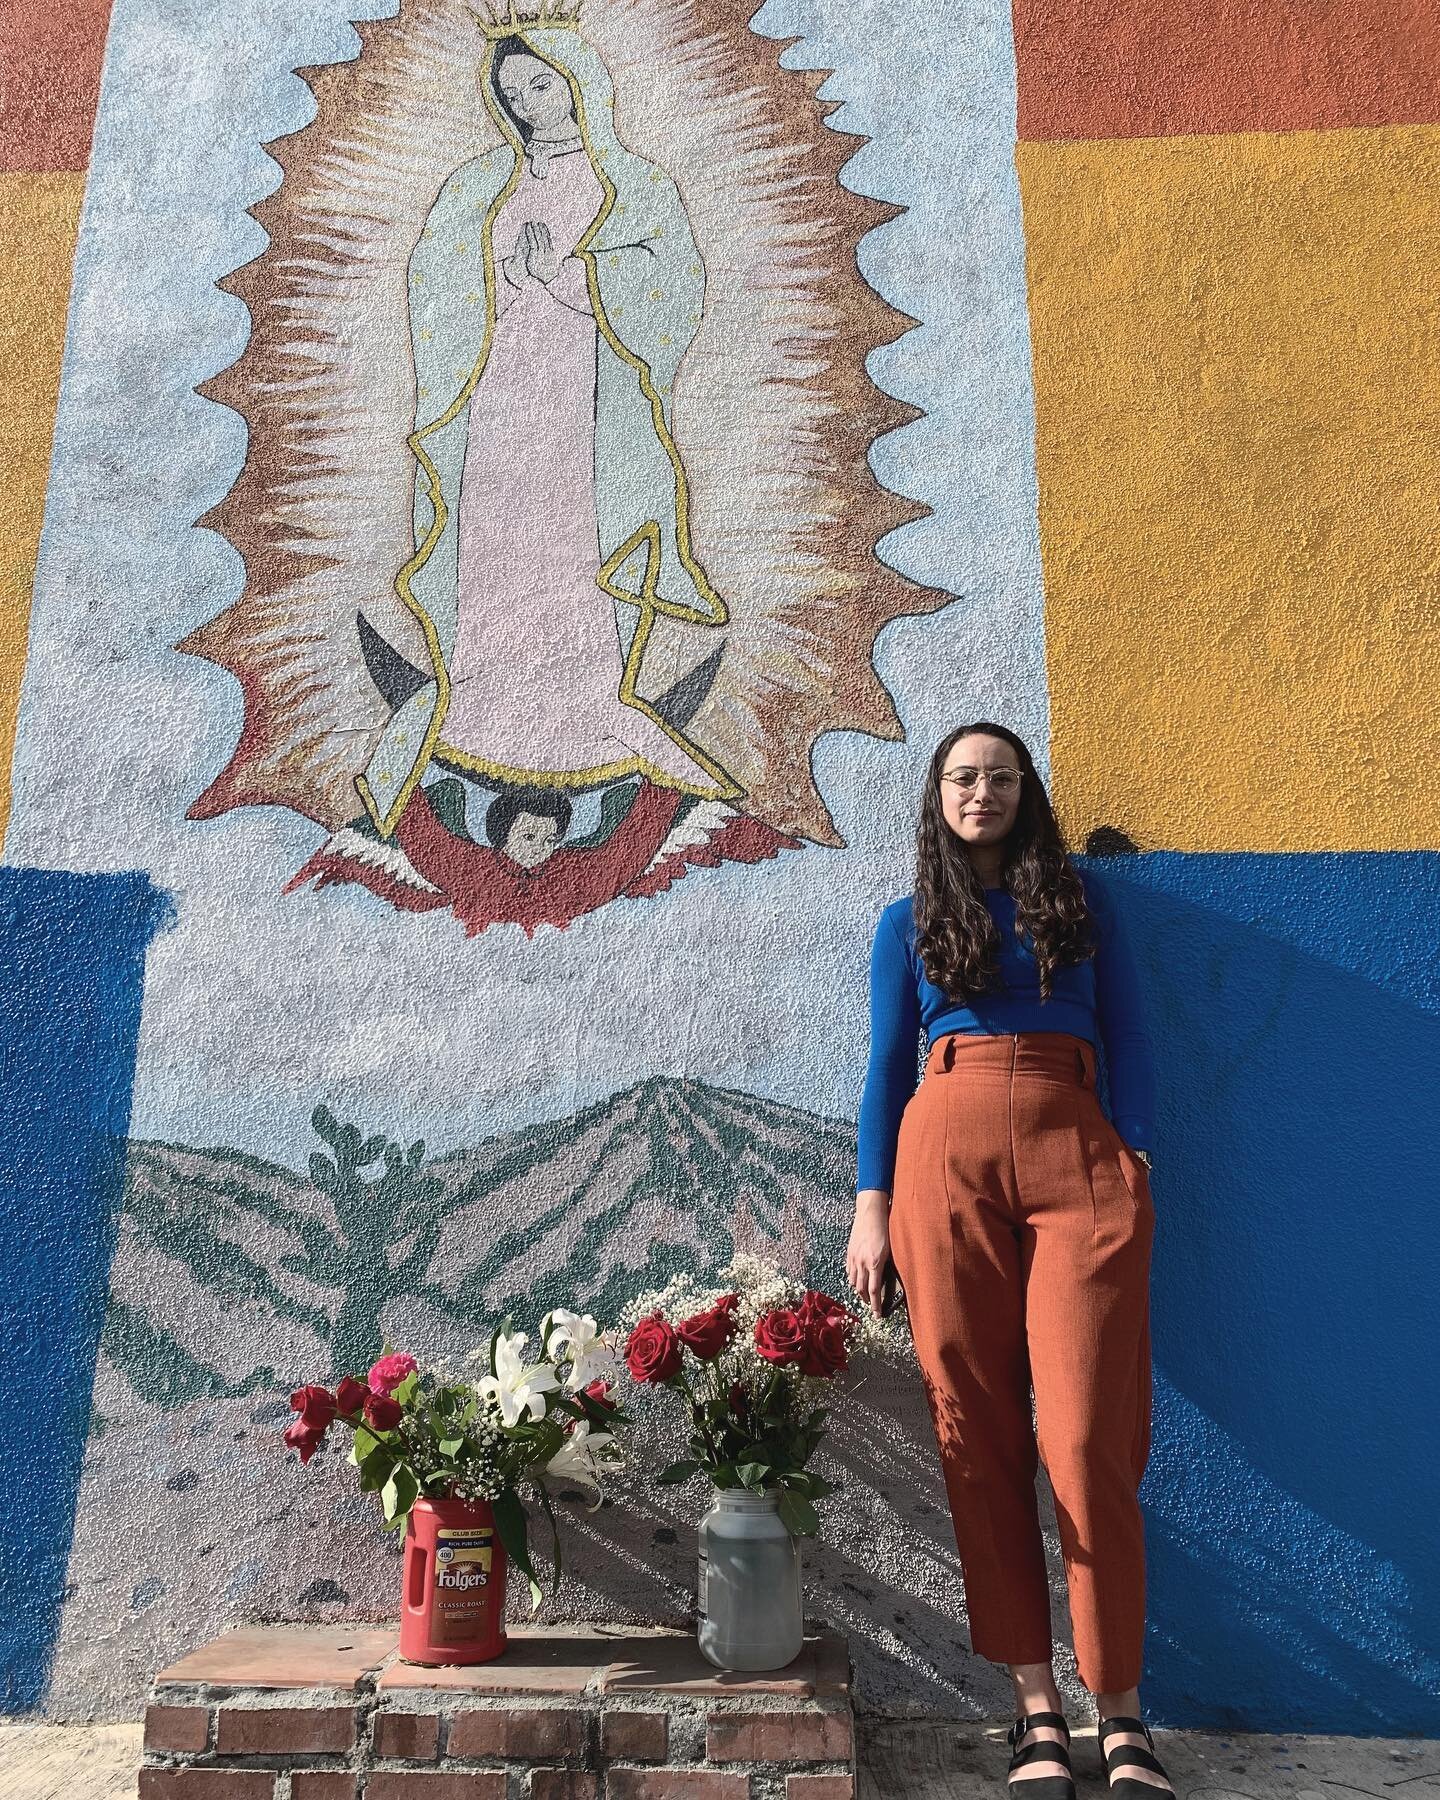 Meet Nydya Mora, a native Angeleno who documents the murals and shrines of the Virgen de Guadalupe all over Los Angeles and publishes them on her Instagram page, @virgensdela. Link in bio for our discussion on Nydya&rsquo;s heritage which inspired th